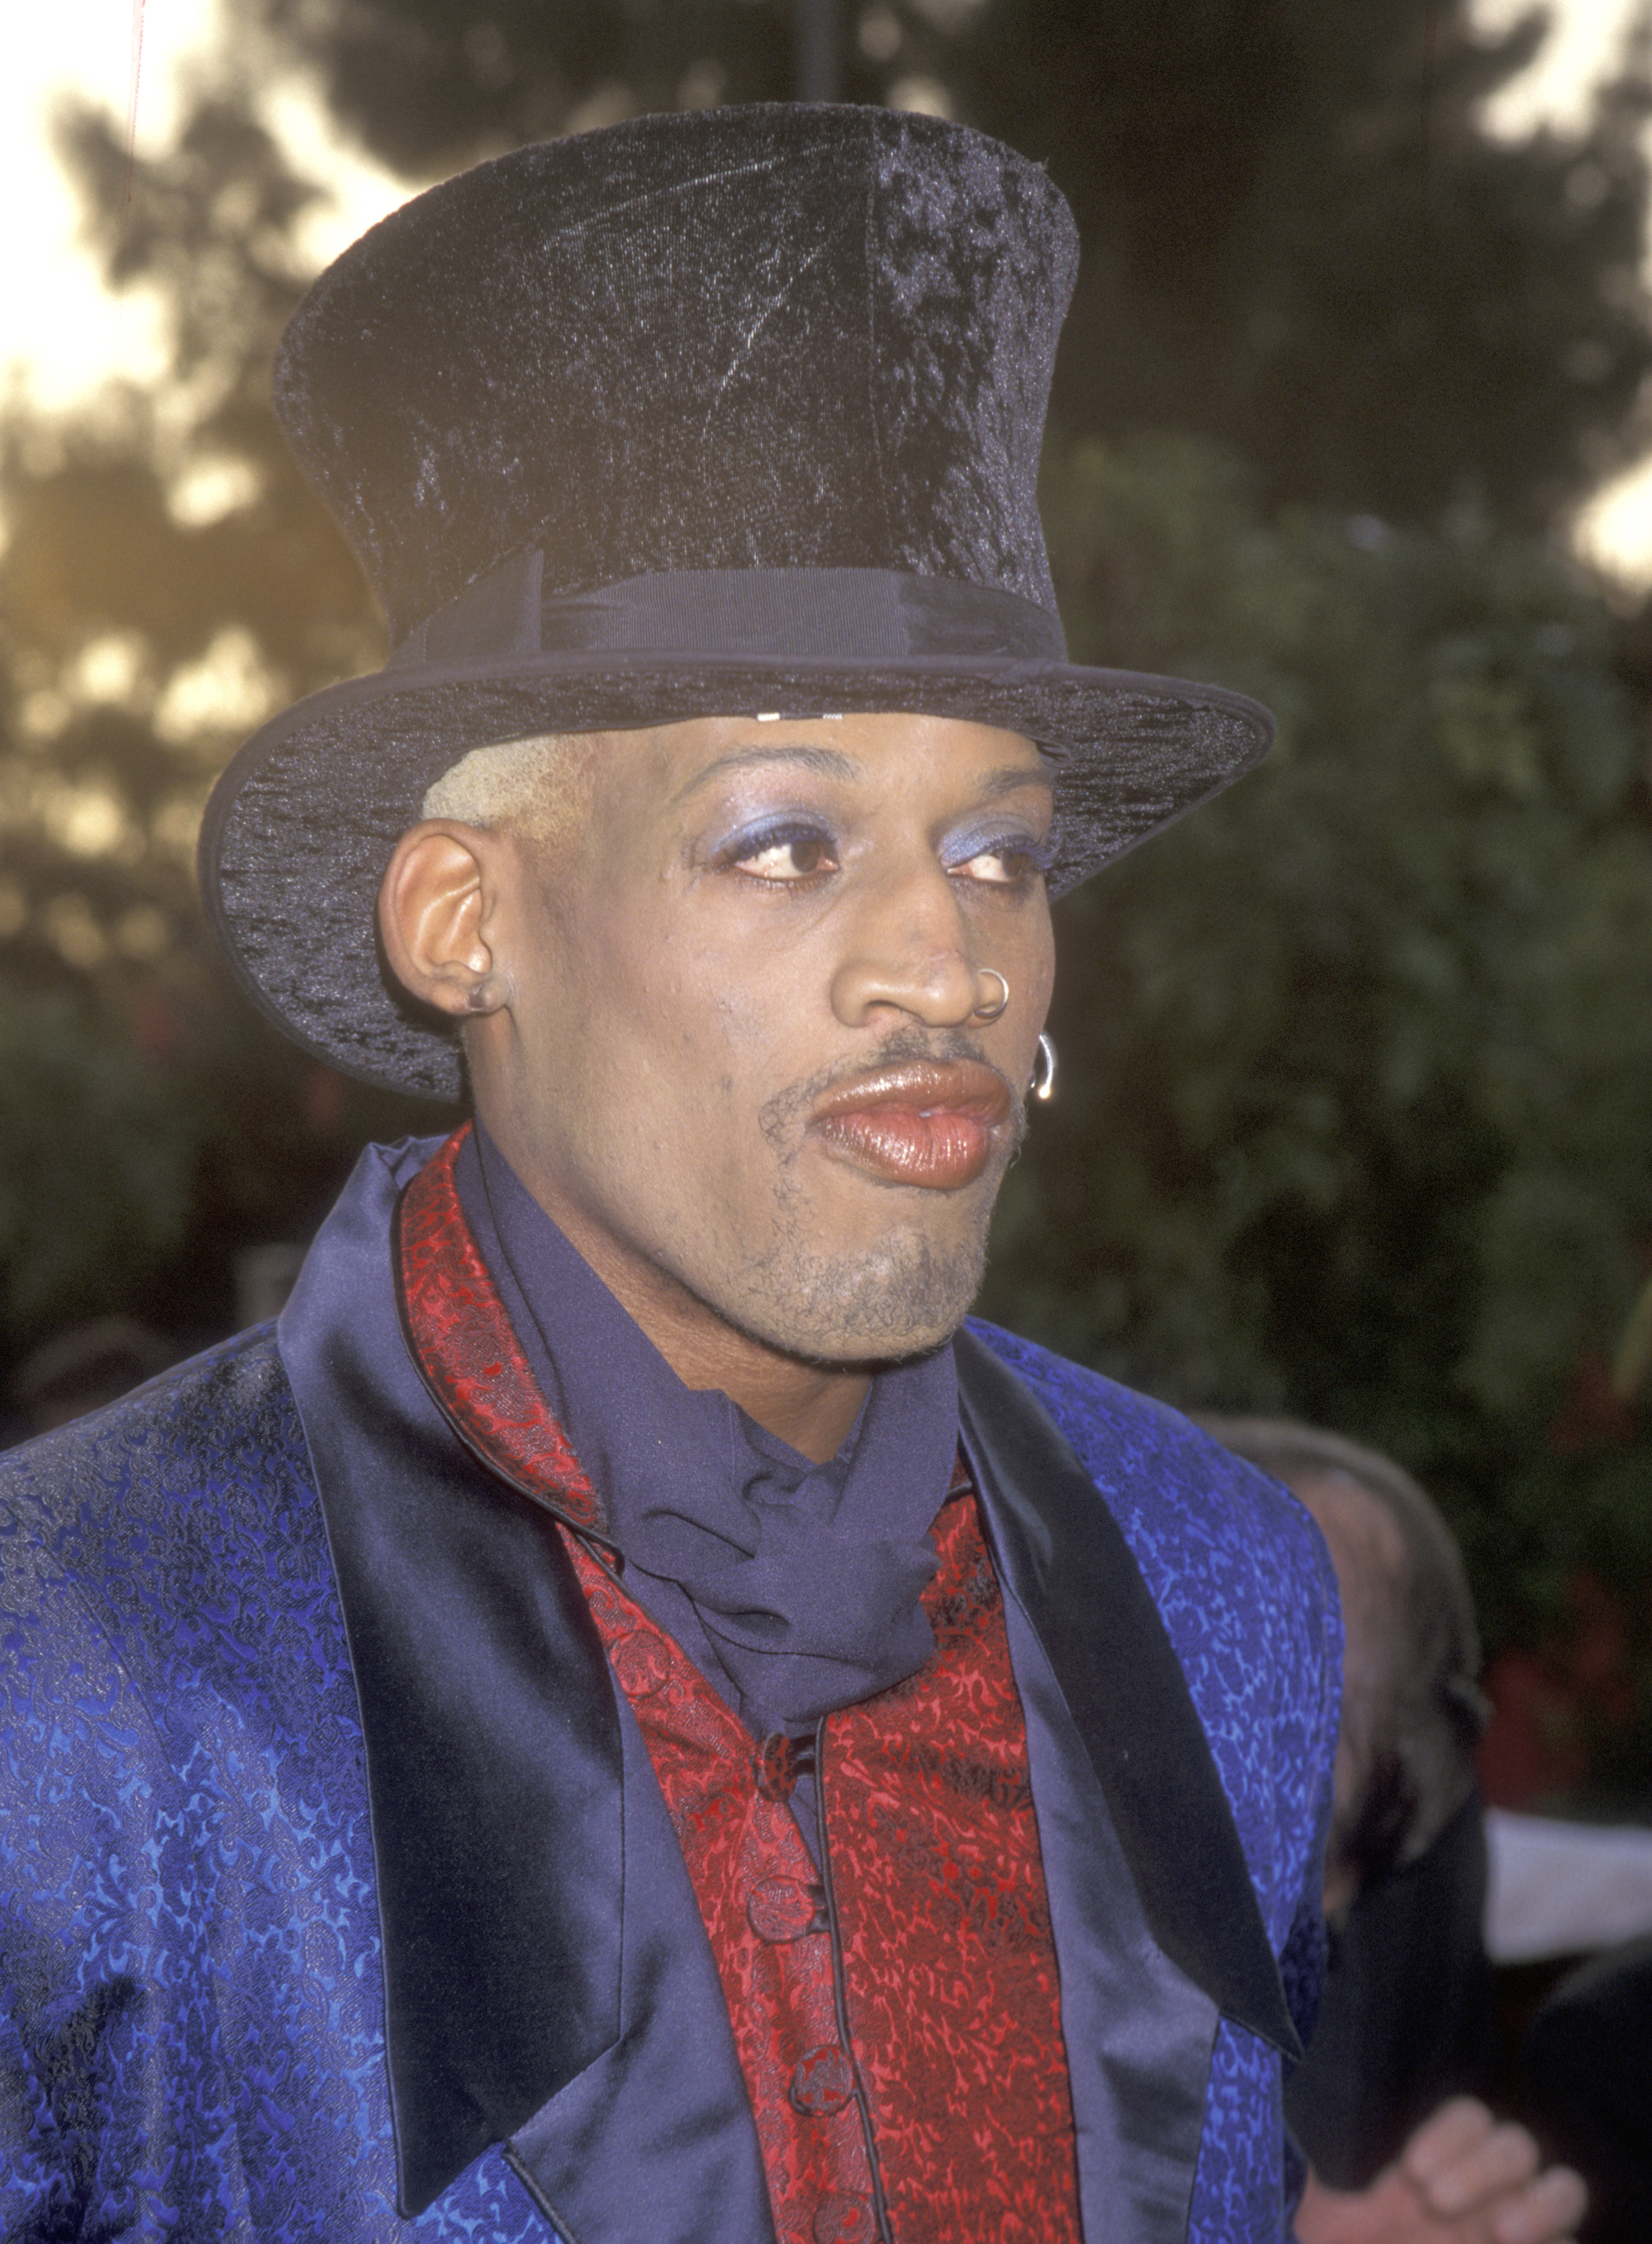 Athlete Dennis Rodman attends the 69th Annual Academy Awards on March 24, 1997 at Shrine Auditorium in Los Angeles, California | Source: Getty Images